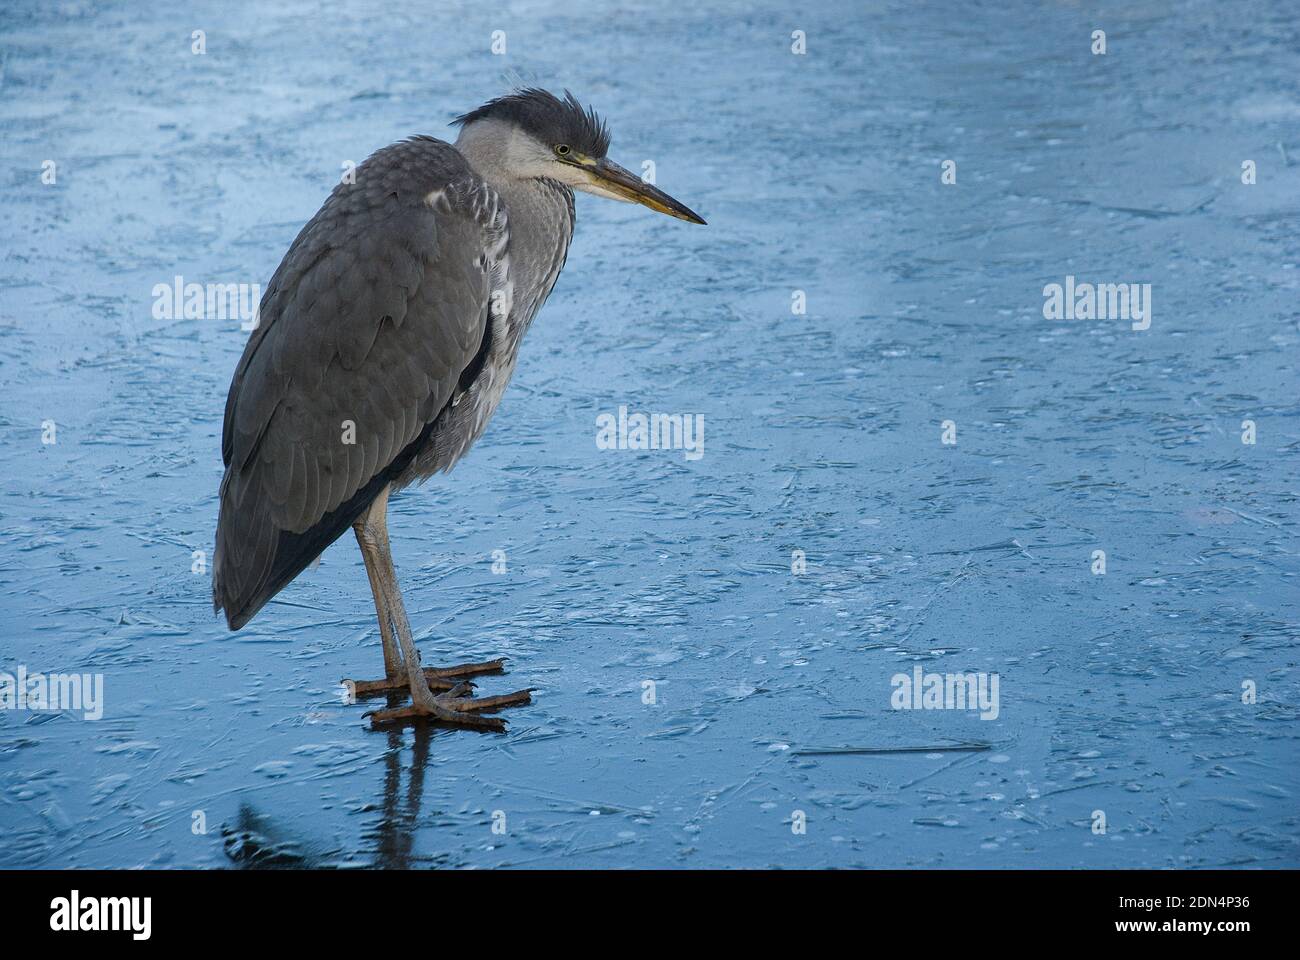 Young grey heron standing motionless on an ice covered lake Stock Photo